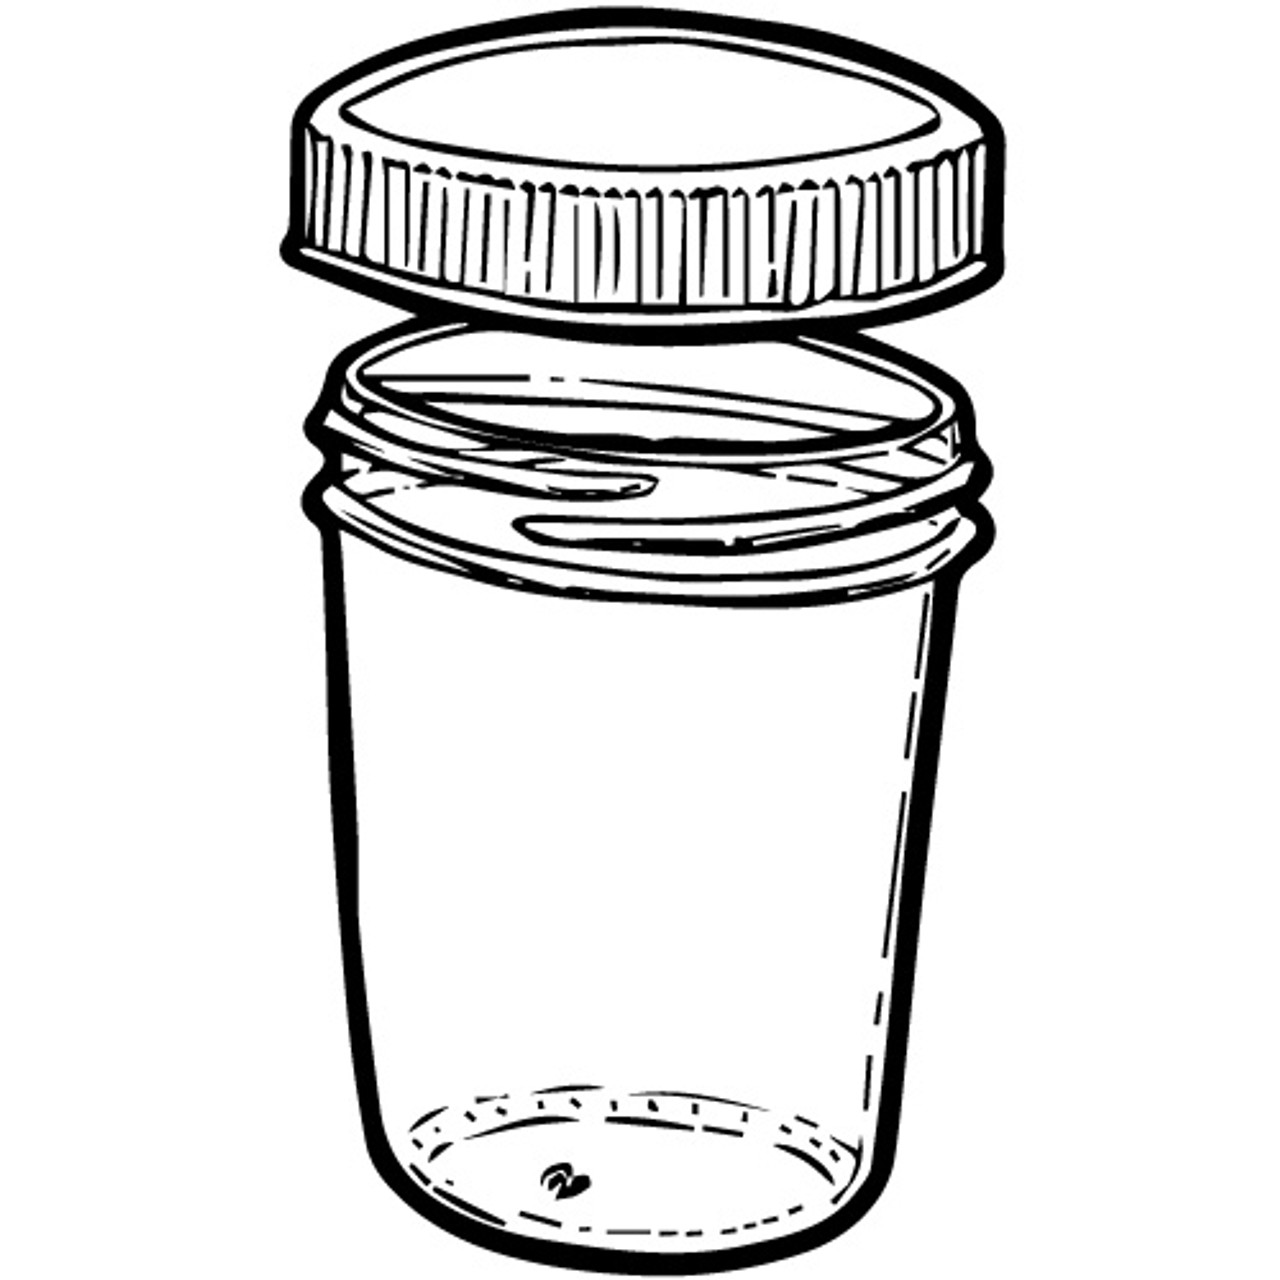 8oz Clear Glass Round Jars (Cap Not Included) for Canning 12/Case, Clear Type III BPA Free 58 mm